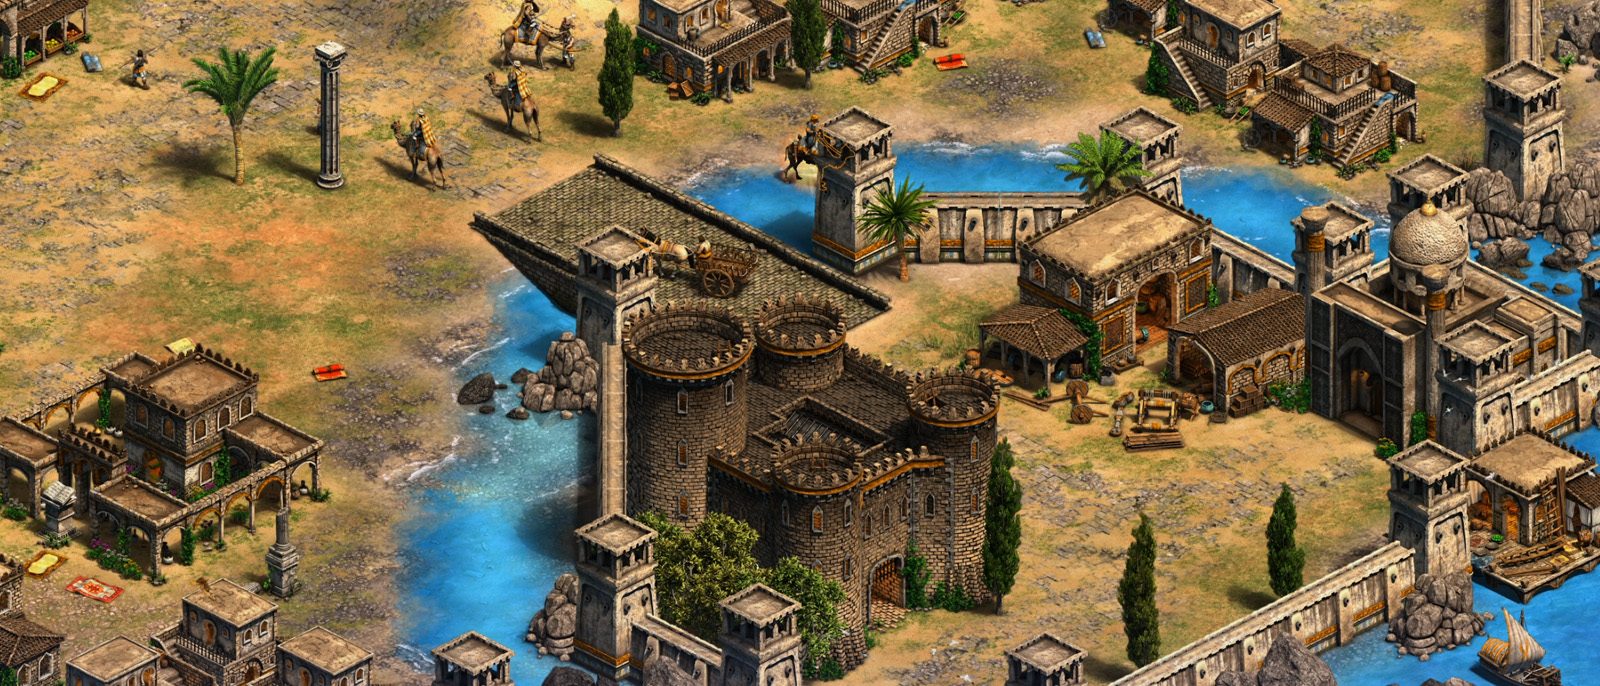 age of empires 2 starting resources